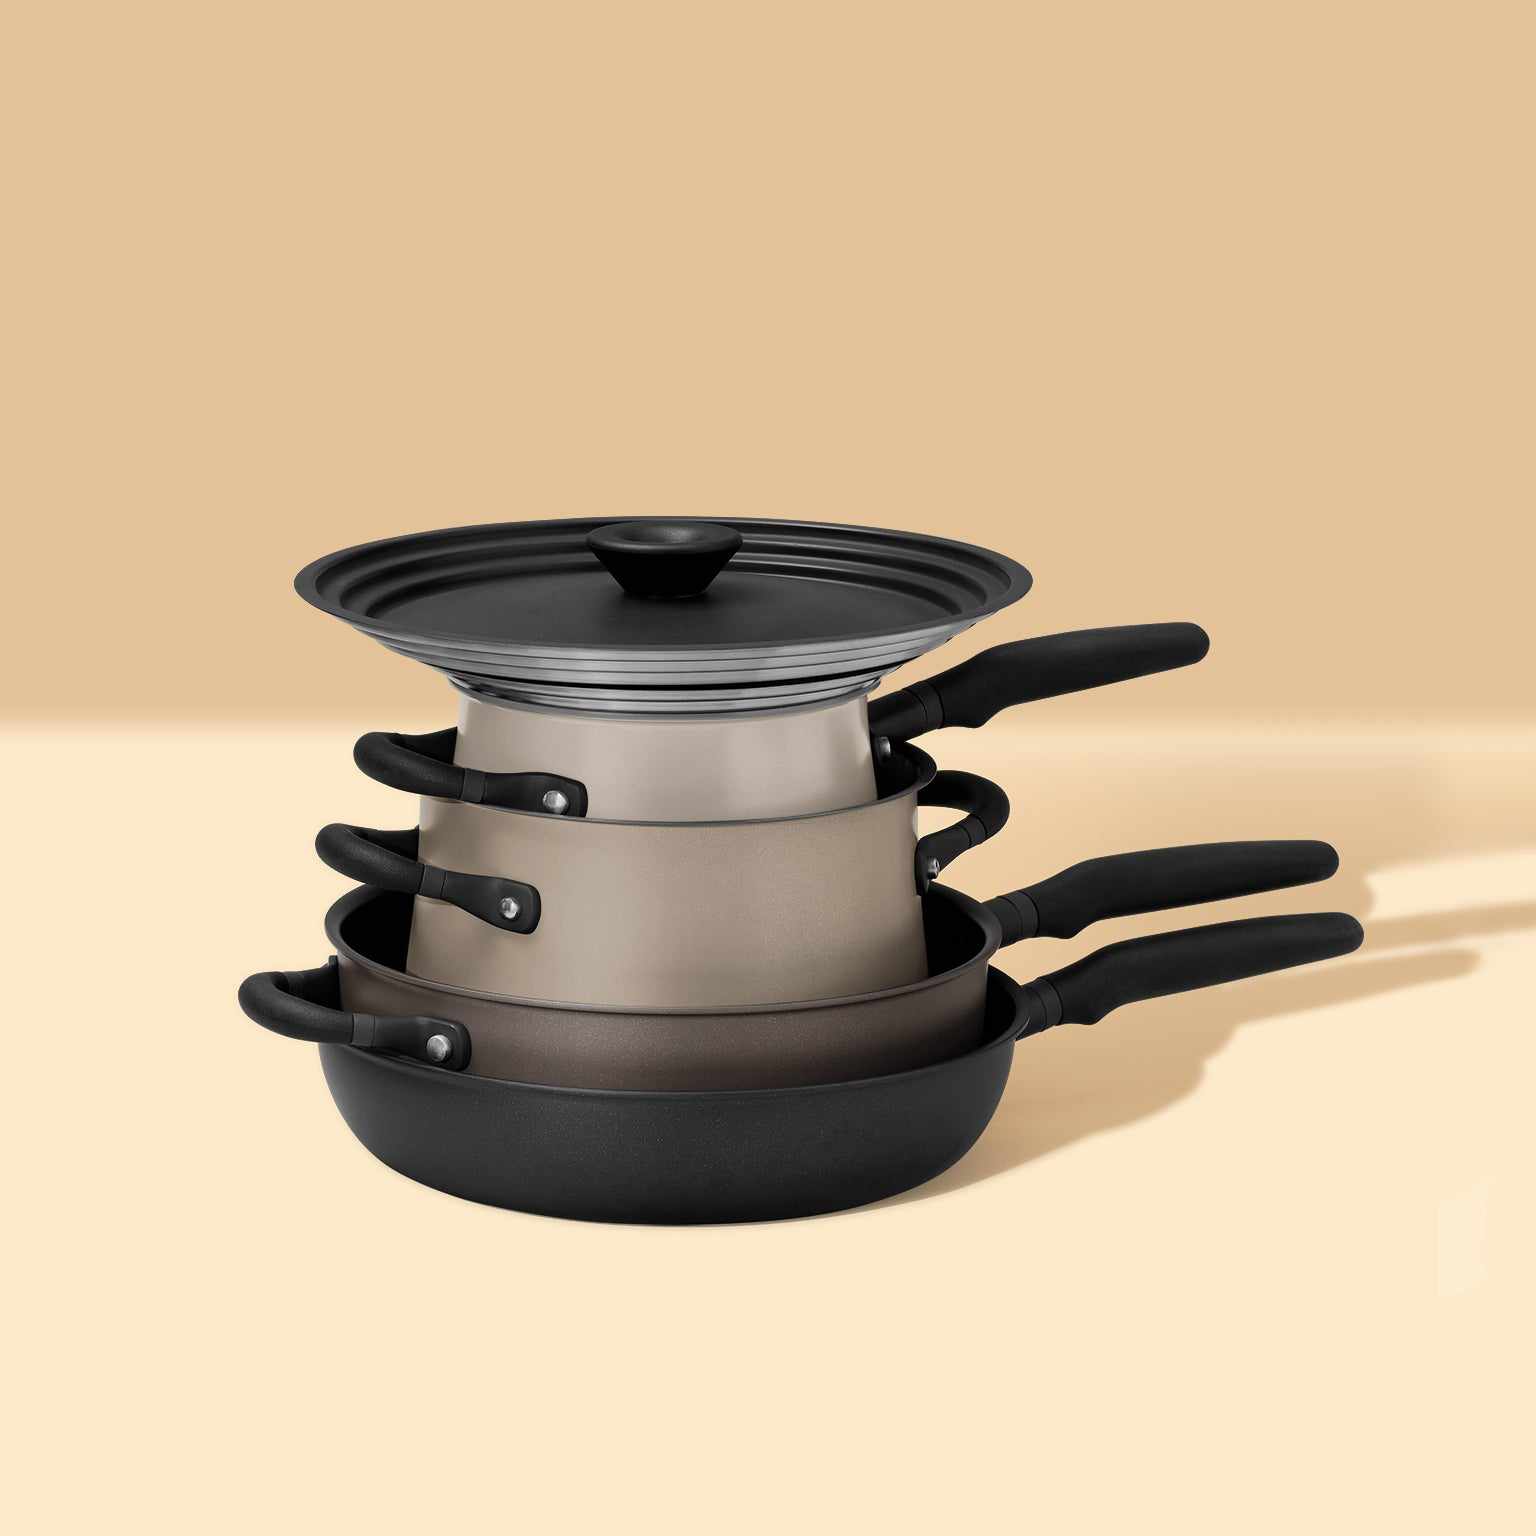 Stackable accent cinder and smoke cookware set in gray gradient tone